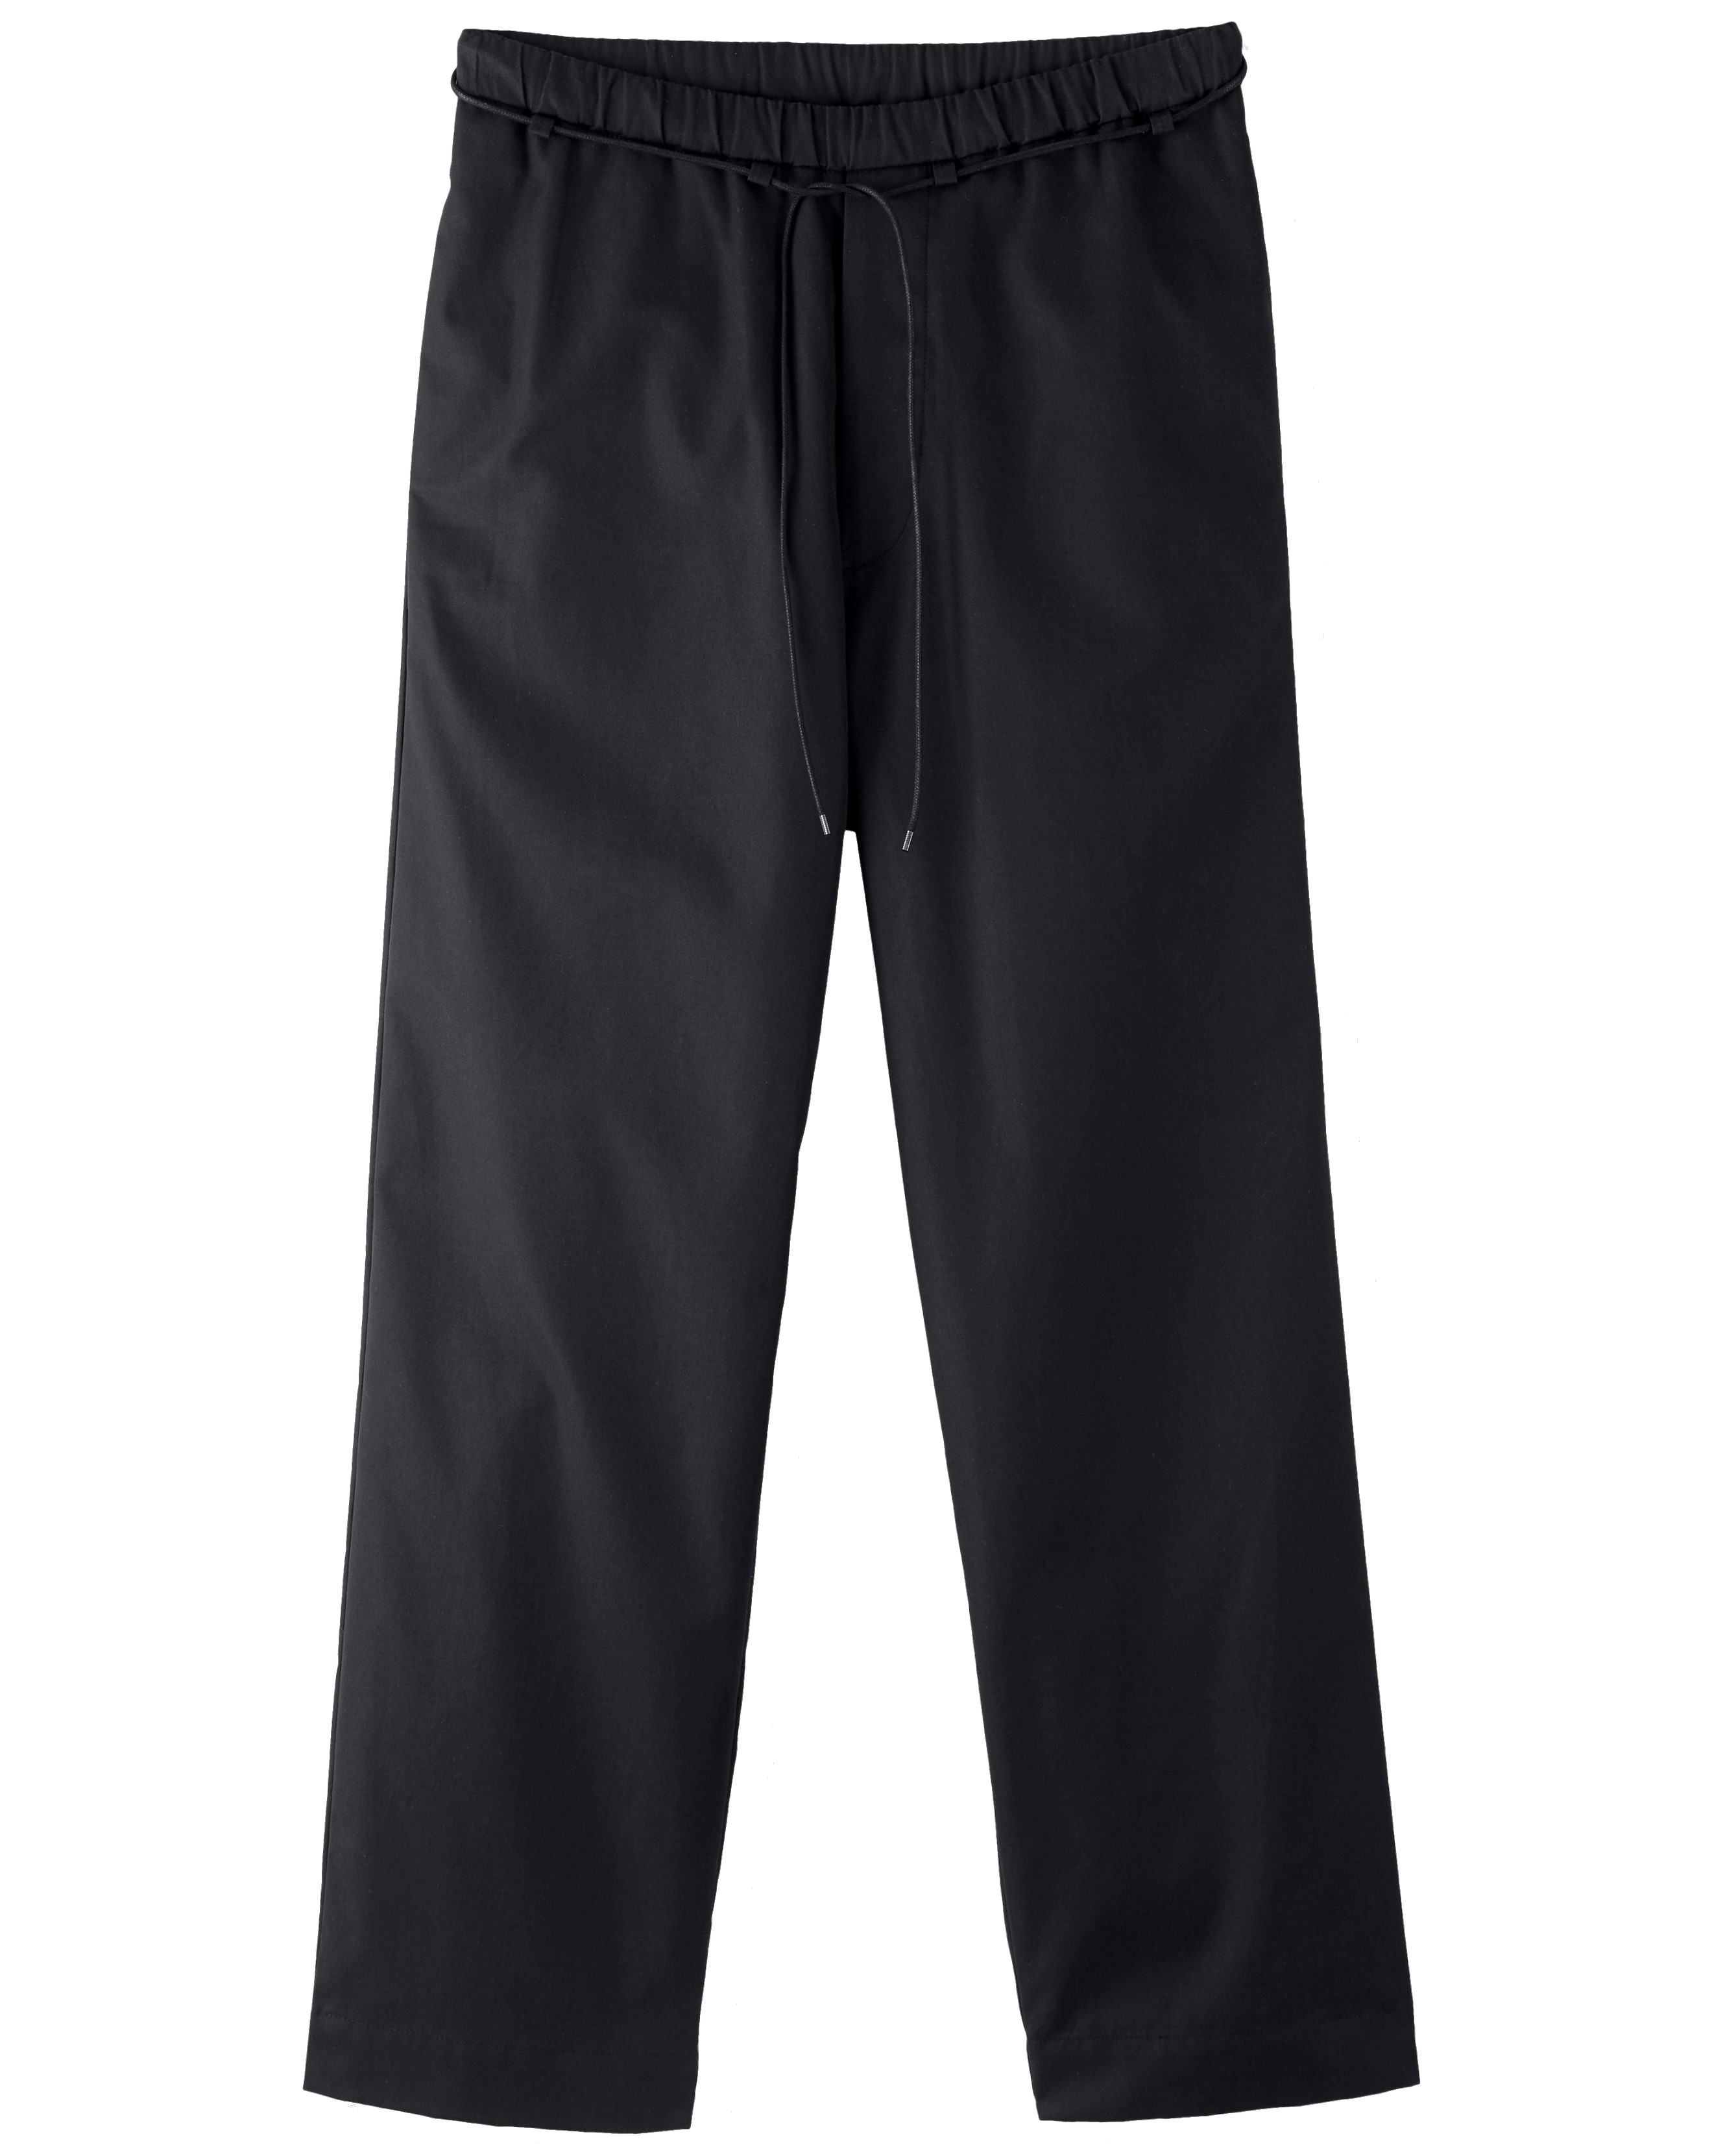 APPLIED ART FORMS Drawstring Pant in Black 50